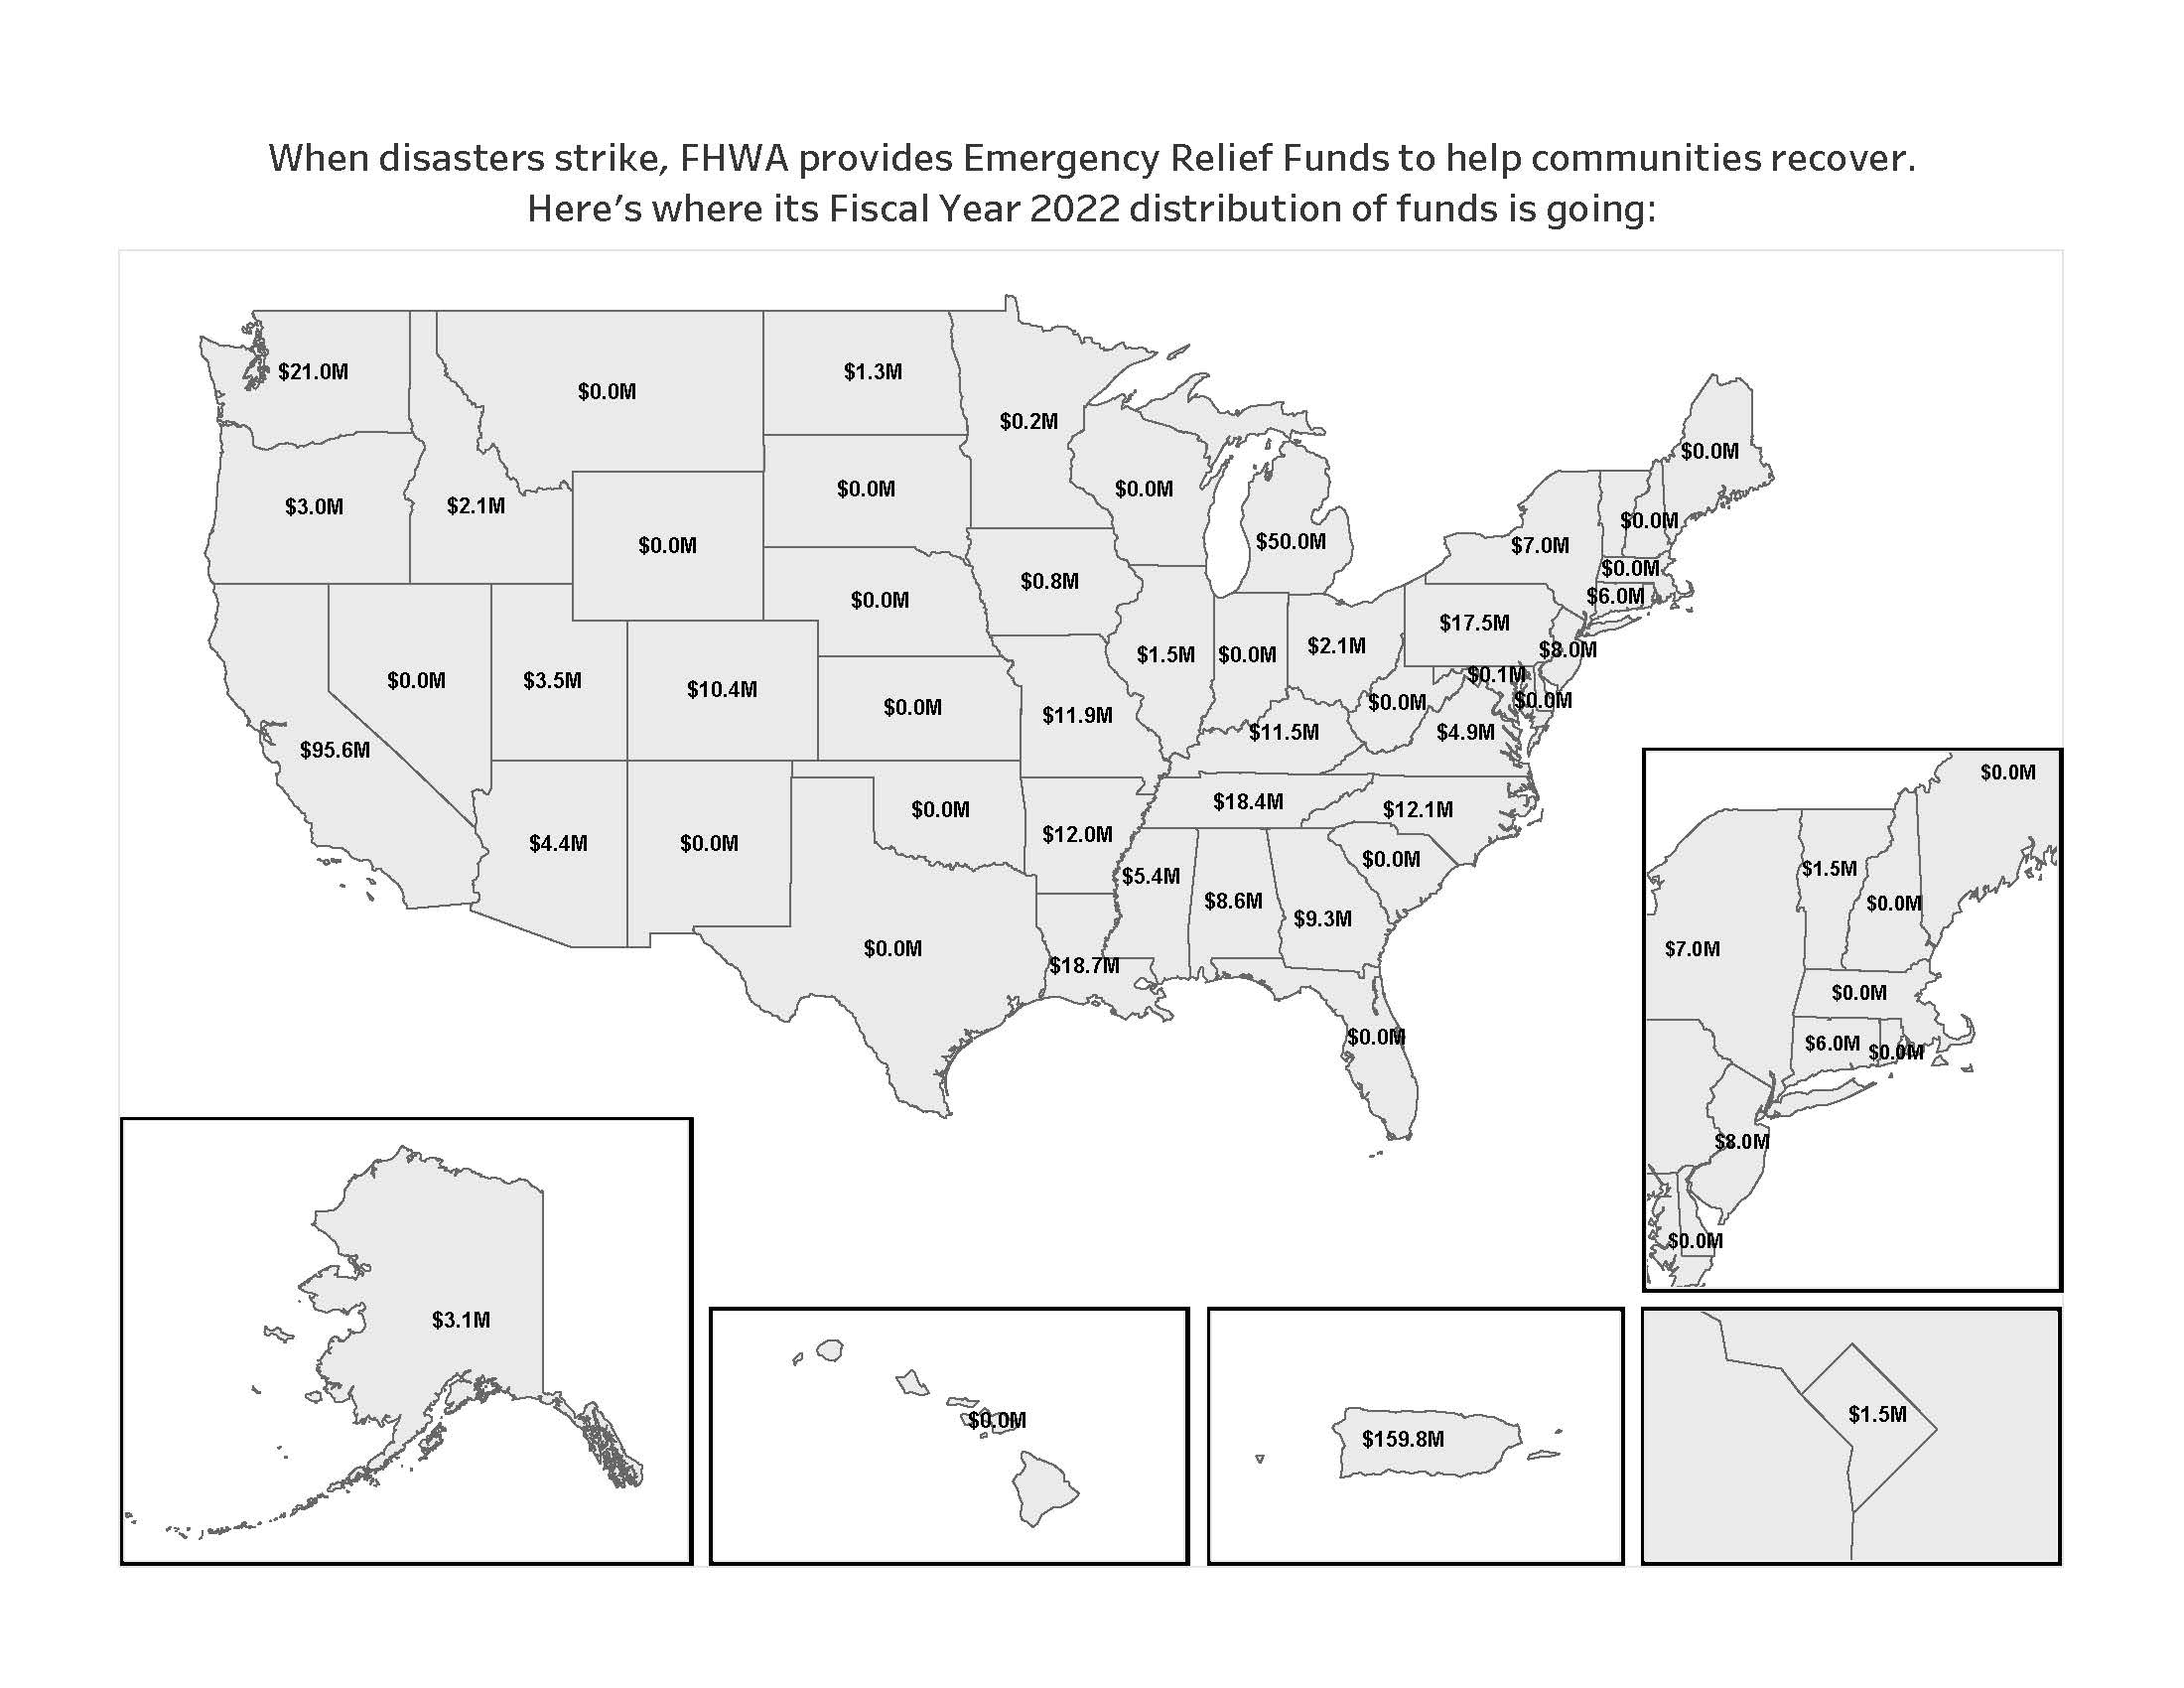 When disasters strike, FHWA provides Emergency Relief Funds to help communities recover. Here's where its Fiscal Year 2022 distribution of funds is going. Amounts received by state: Alabama, 8.6 million; Alaska, 3.1 million; Arizona, 4.4 million; Arkansas, 12.0 million; California, 95.6 million; Colorado, 10.4 million; Connecticut, 6.0 million; District of Columbia, 1.5 million; Georgia, 9.3 million; Idaho, 2.1 million; Illinois, 1.5 million; Iowa, 0.8 million; Kentucky, 11.5 million; Louisiana, 18.7 million; Maryland, 0.1 million; Michigan, 50.0 million; Minnesota, 0.2 million; Mississippi, 5.4 million; Missouri, 11.9 million; New Jersey, 8.0 million; New York, 7.0 million; North Carolina, 12.1 million; North Dakota, 1.3 million; Ohio, 2.1 million; Oregon, 3.0 million; Pennsylvania, 17.5 million; Puerto Rico, 159.8 million; Tennessee, 18.4 million; Utah, 3.5 million; Vermont, 1.5 million; Virginia, 4.9 million; Washington, 21.0 million.